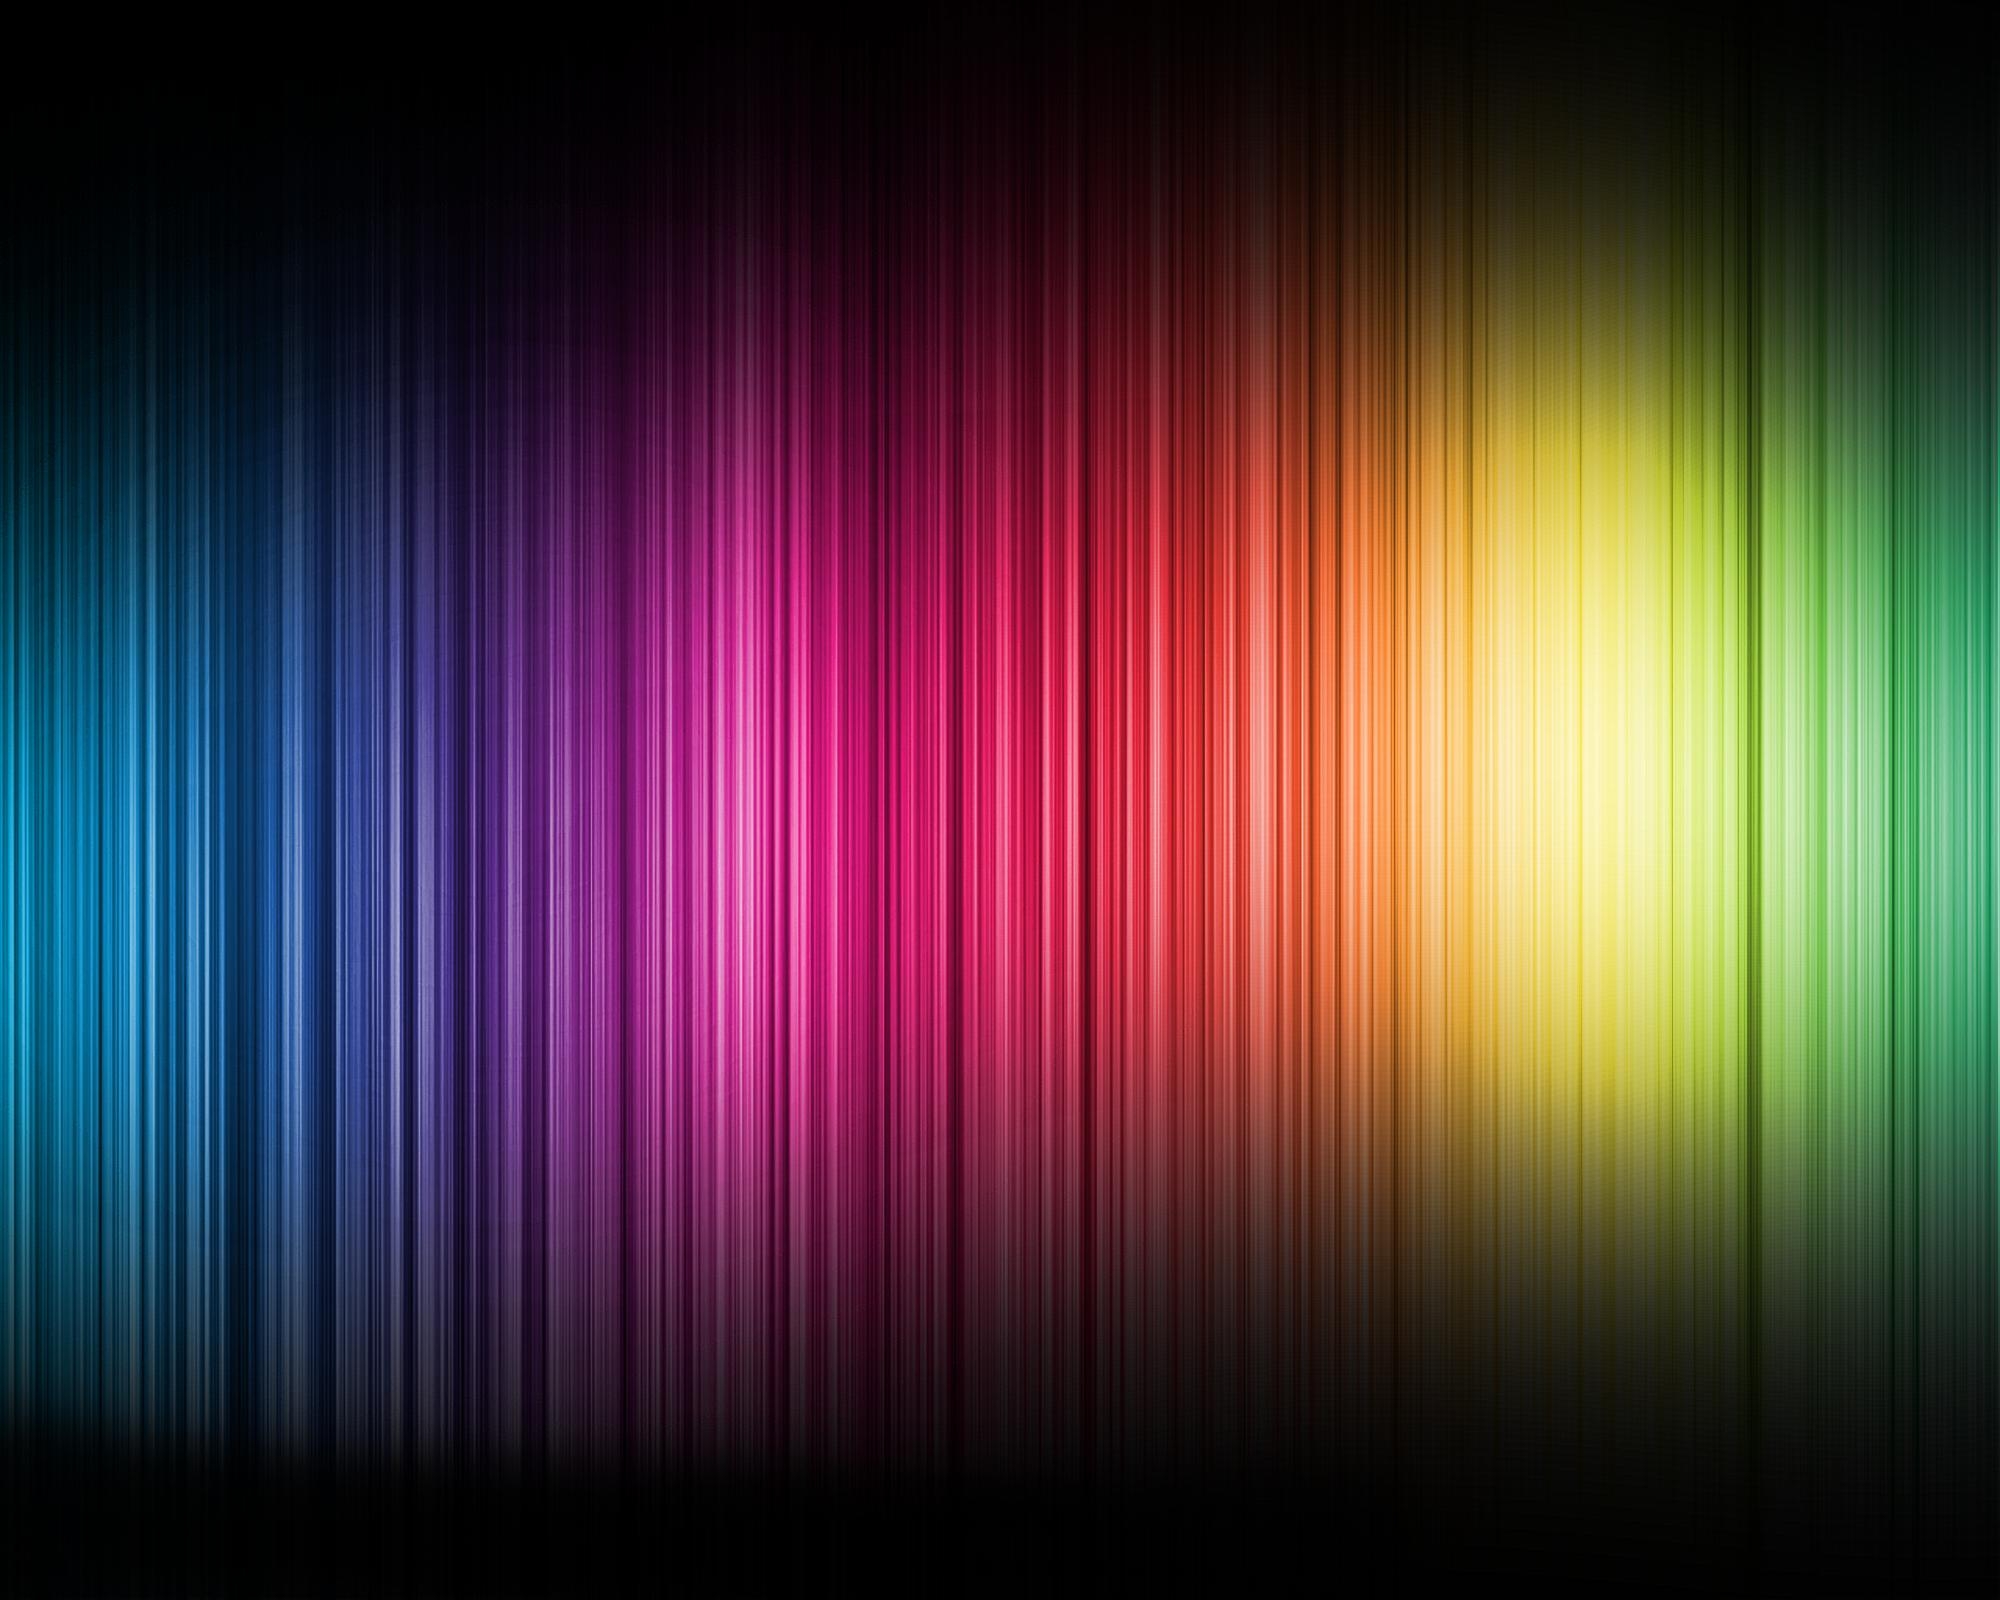 103747 download wallpaper color, abstract, stripes, streaks, vertical, spectrum screensavers and pictures for free